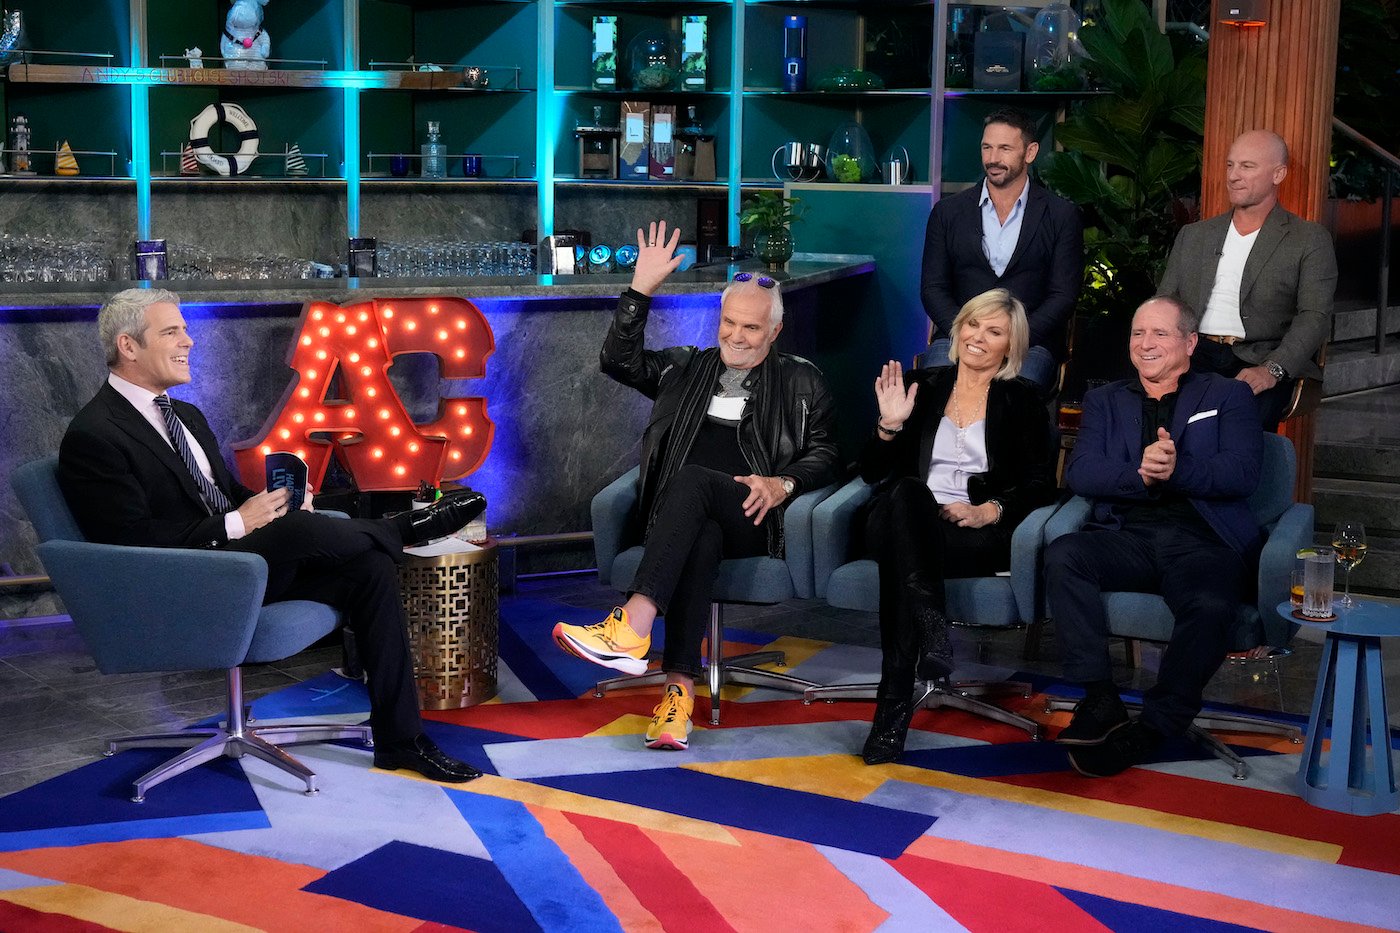 Andy Cohen, meets with Capt. Lee Rosbach, Capt. Sandy Yawn, Capt. Jason Chambers, Capt. Glenn Shephard, Capt. Kerry Titheradge from the 'Below Deck' franchise 